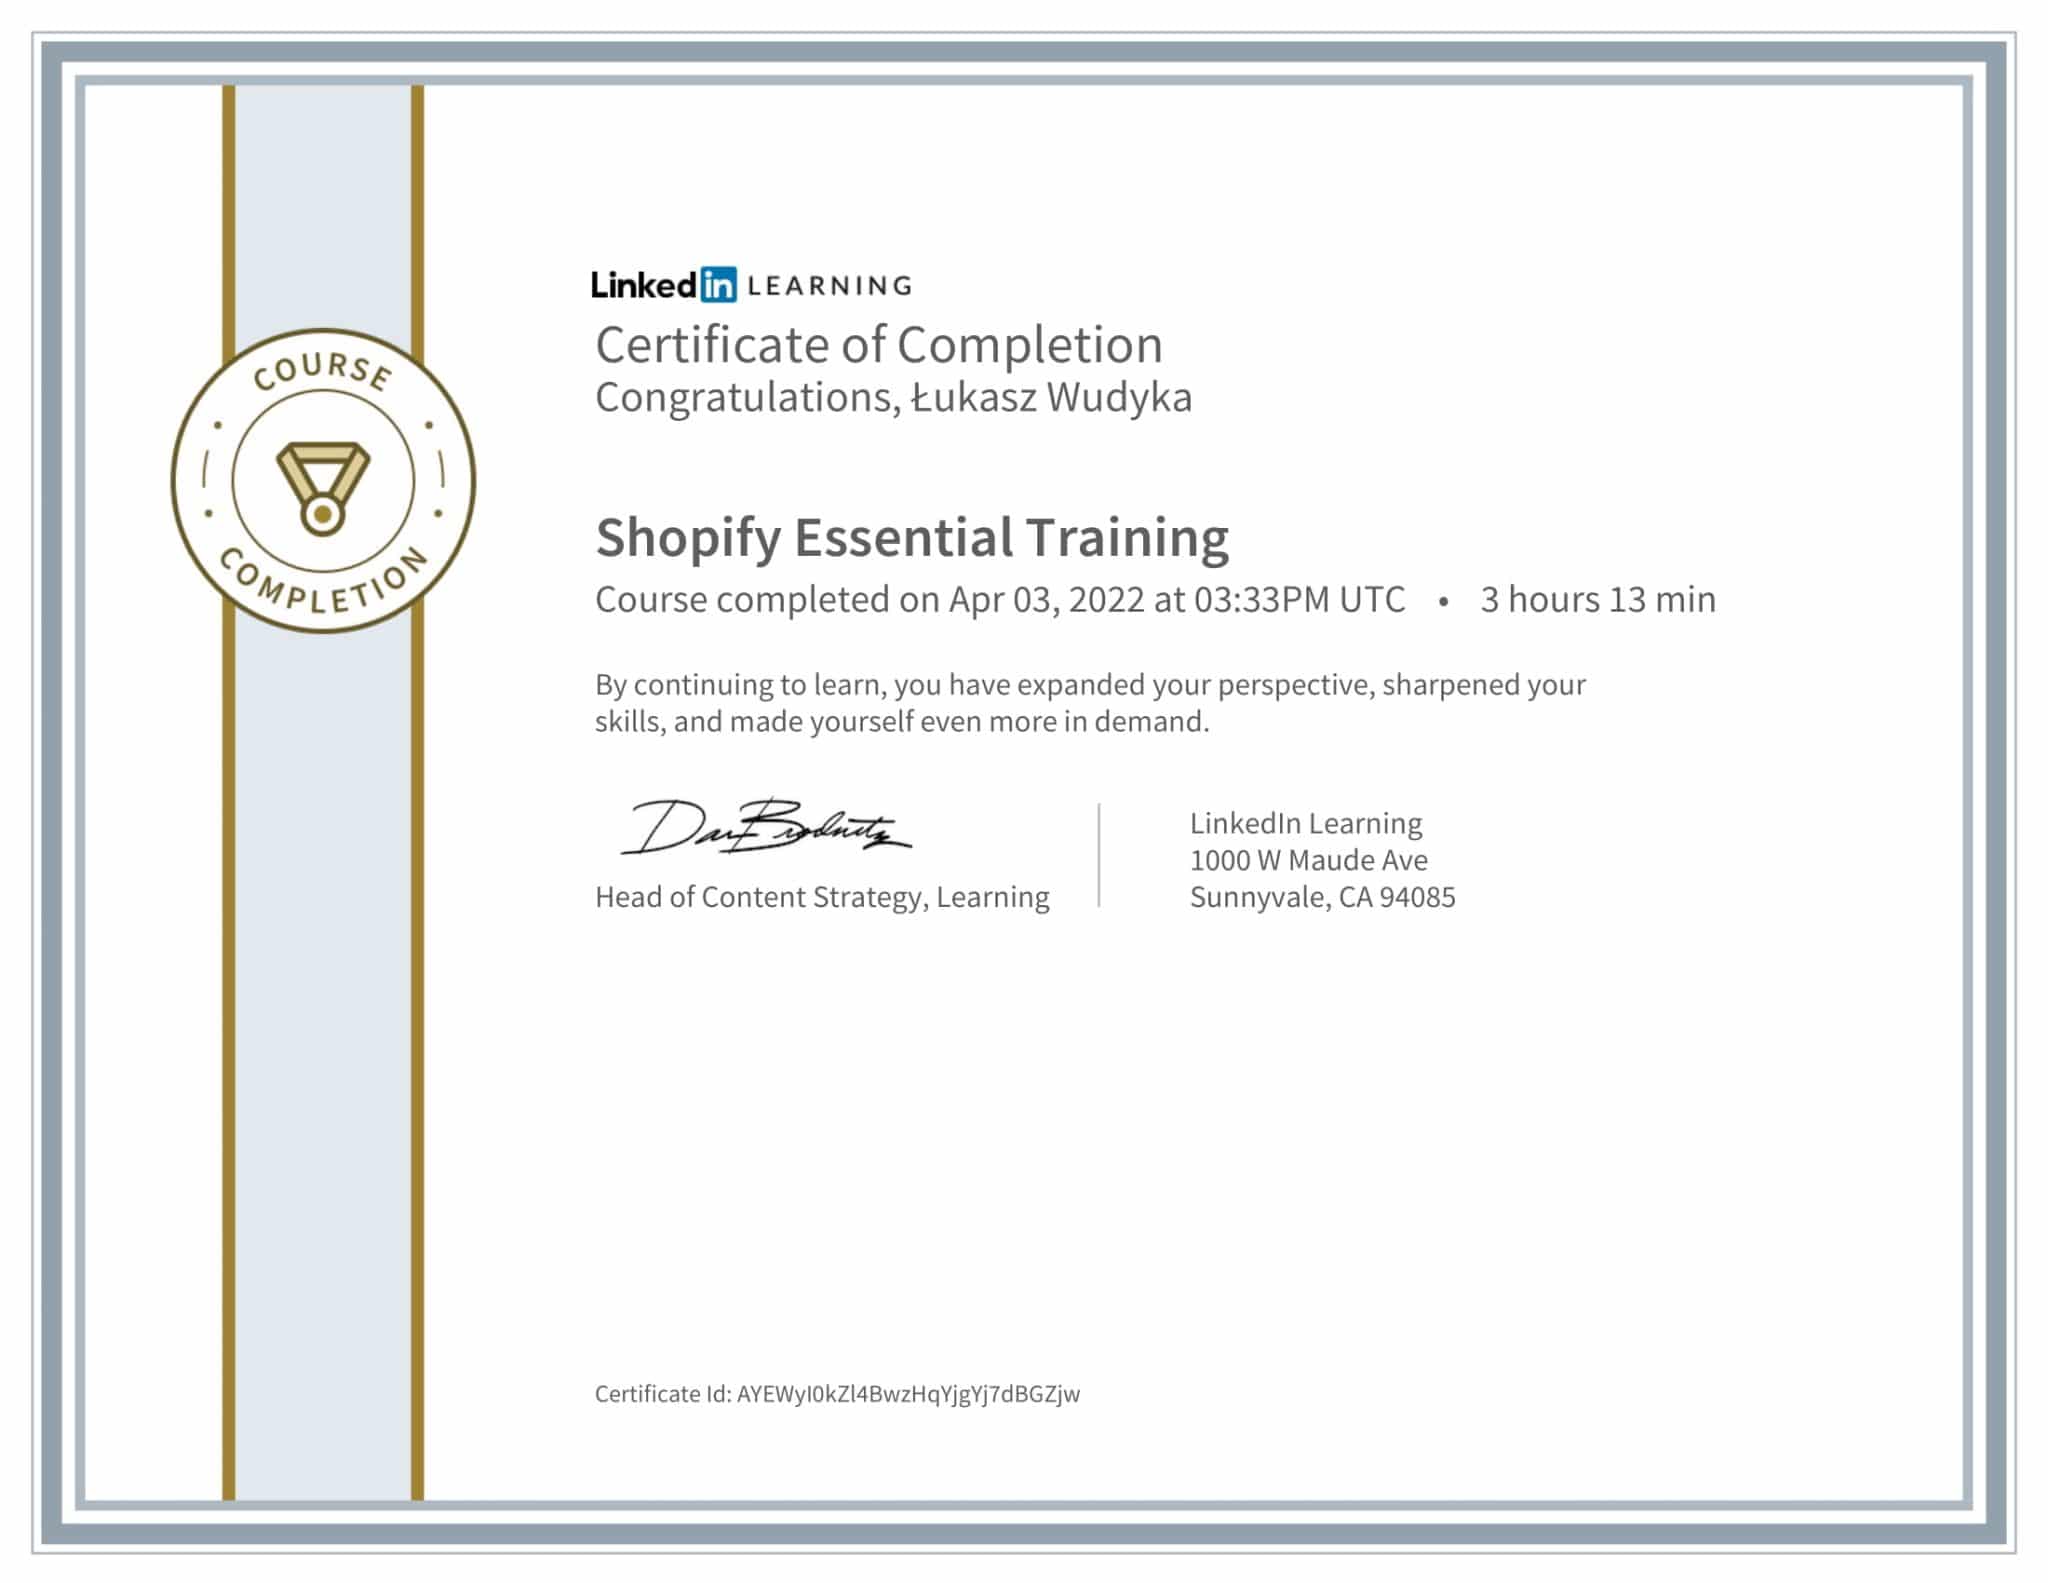 CertificateOfCompletion_Shopify Essential Training-1